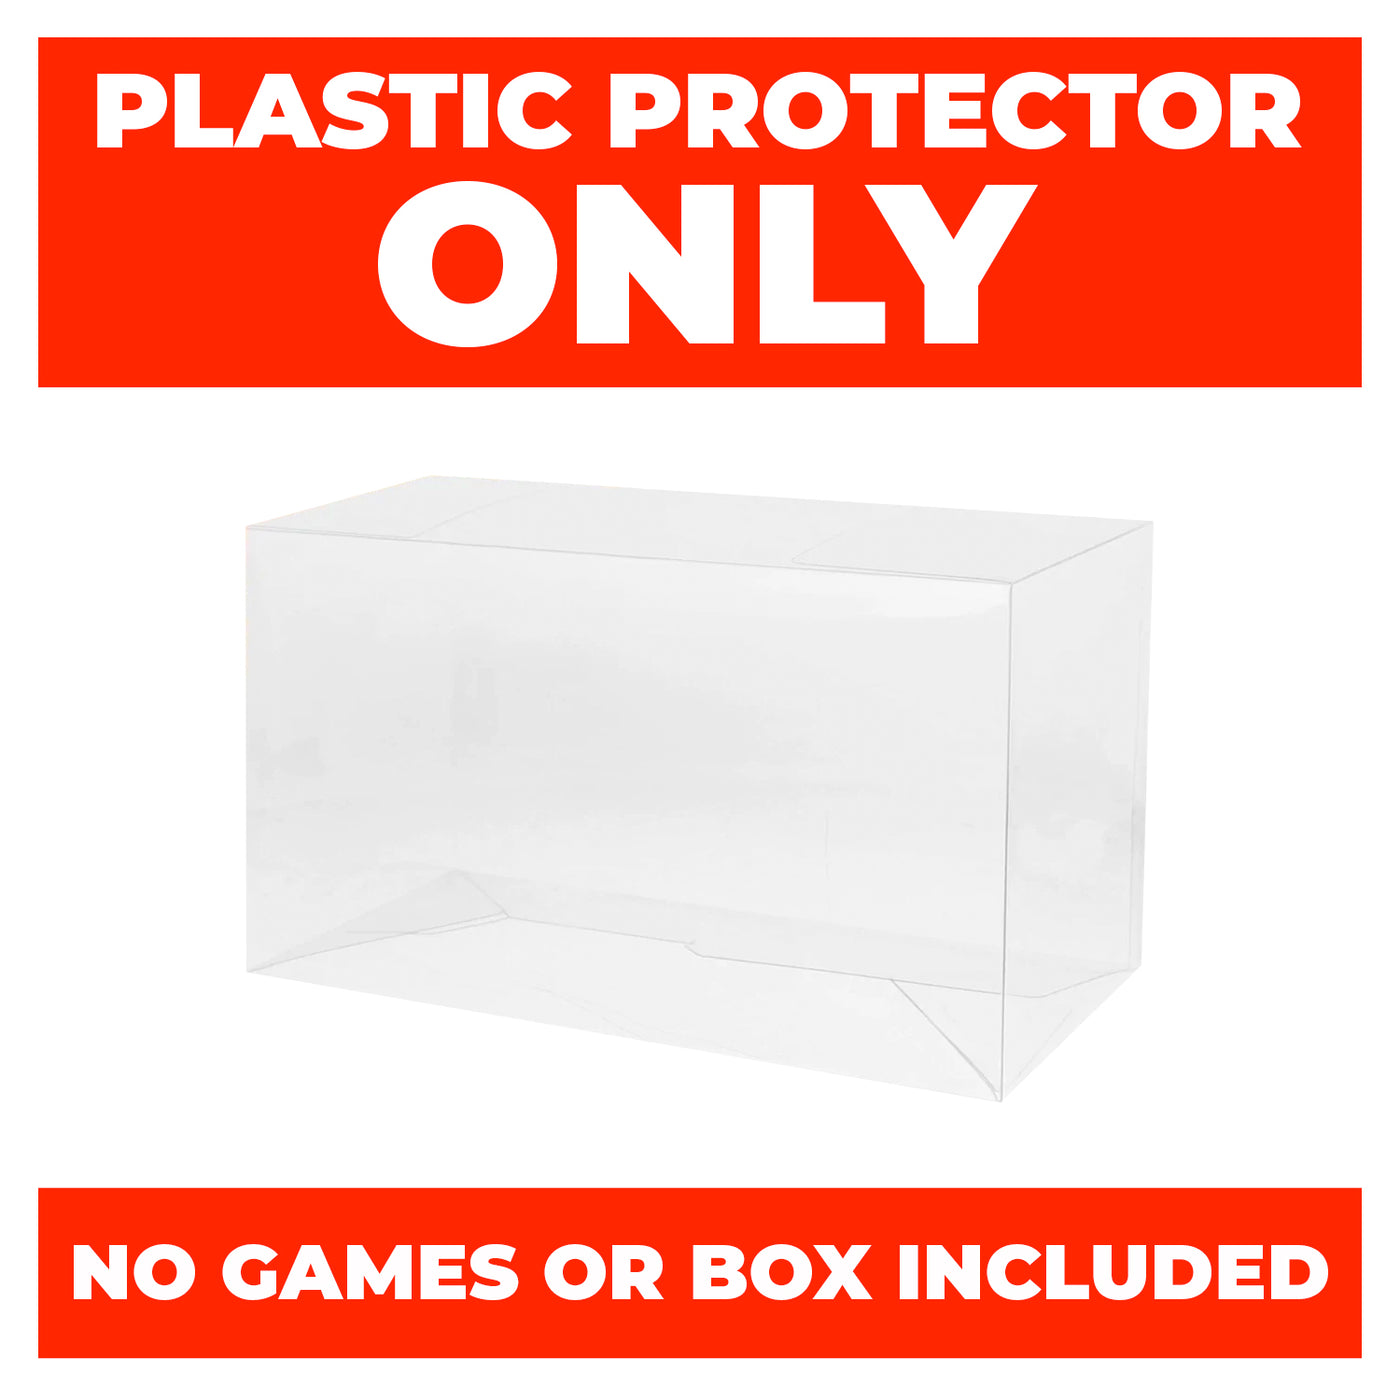 Plastic Protector for NES Video Game Box 0.50mm thick, UV & Scratch Resistant 5h x 7w x 0.75d on The Pop Protector Guide by Display Geek